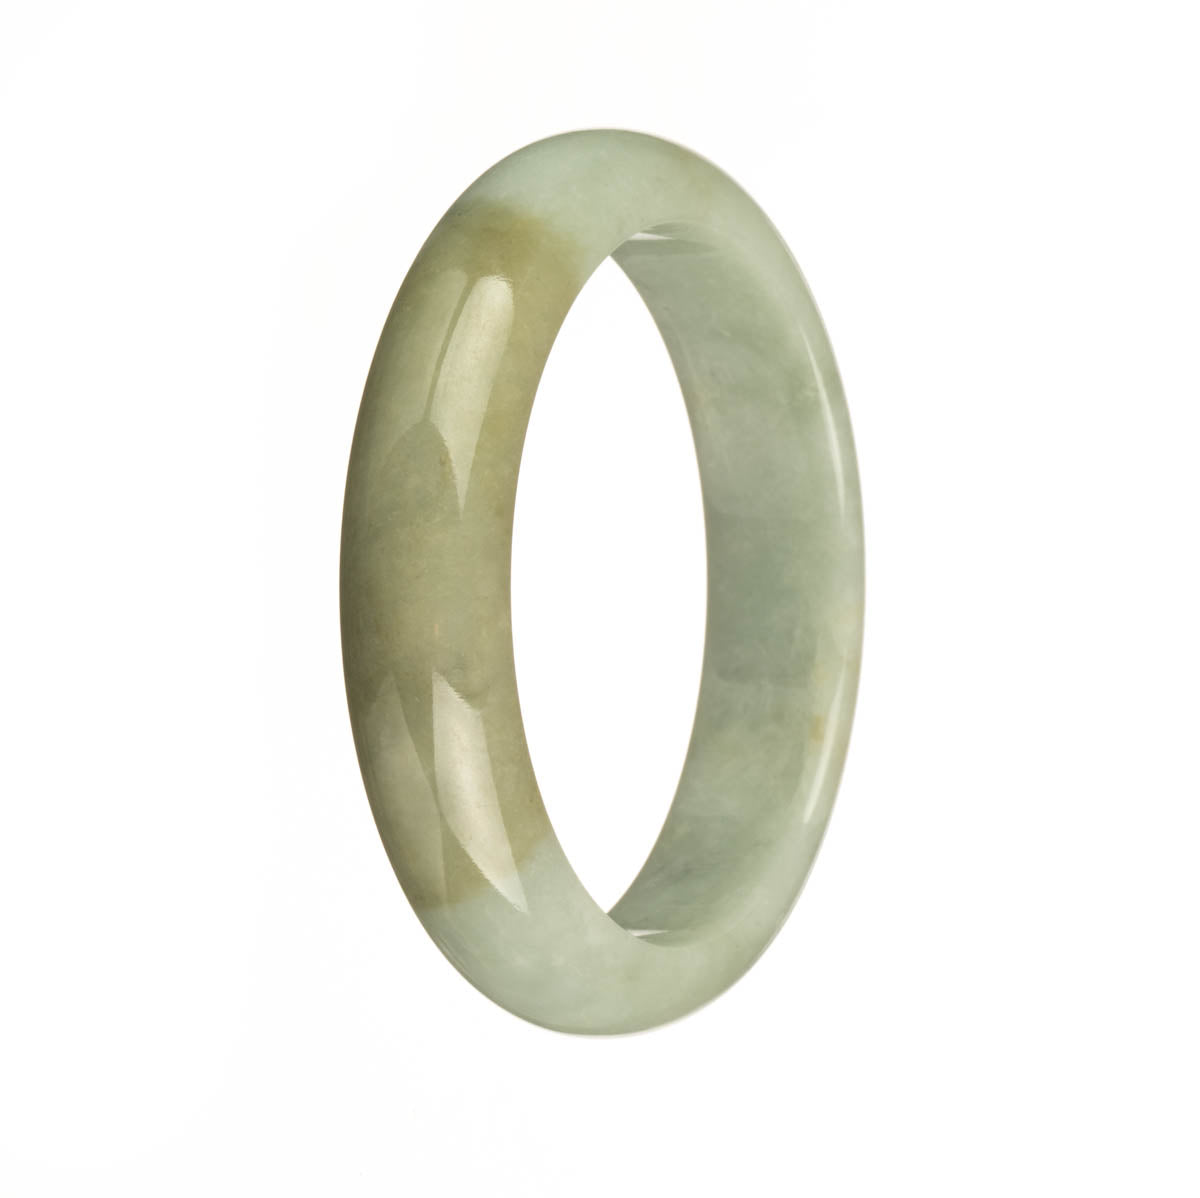 A beautiful green jadeite bangle bracelet with olive green patches, made from genuine Grade A jade. The bracelet is in a 57mm half moon shape, perfect for adding a touch of elegance to any outfit.